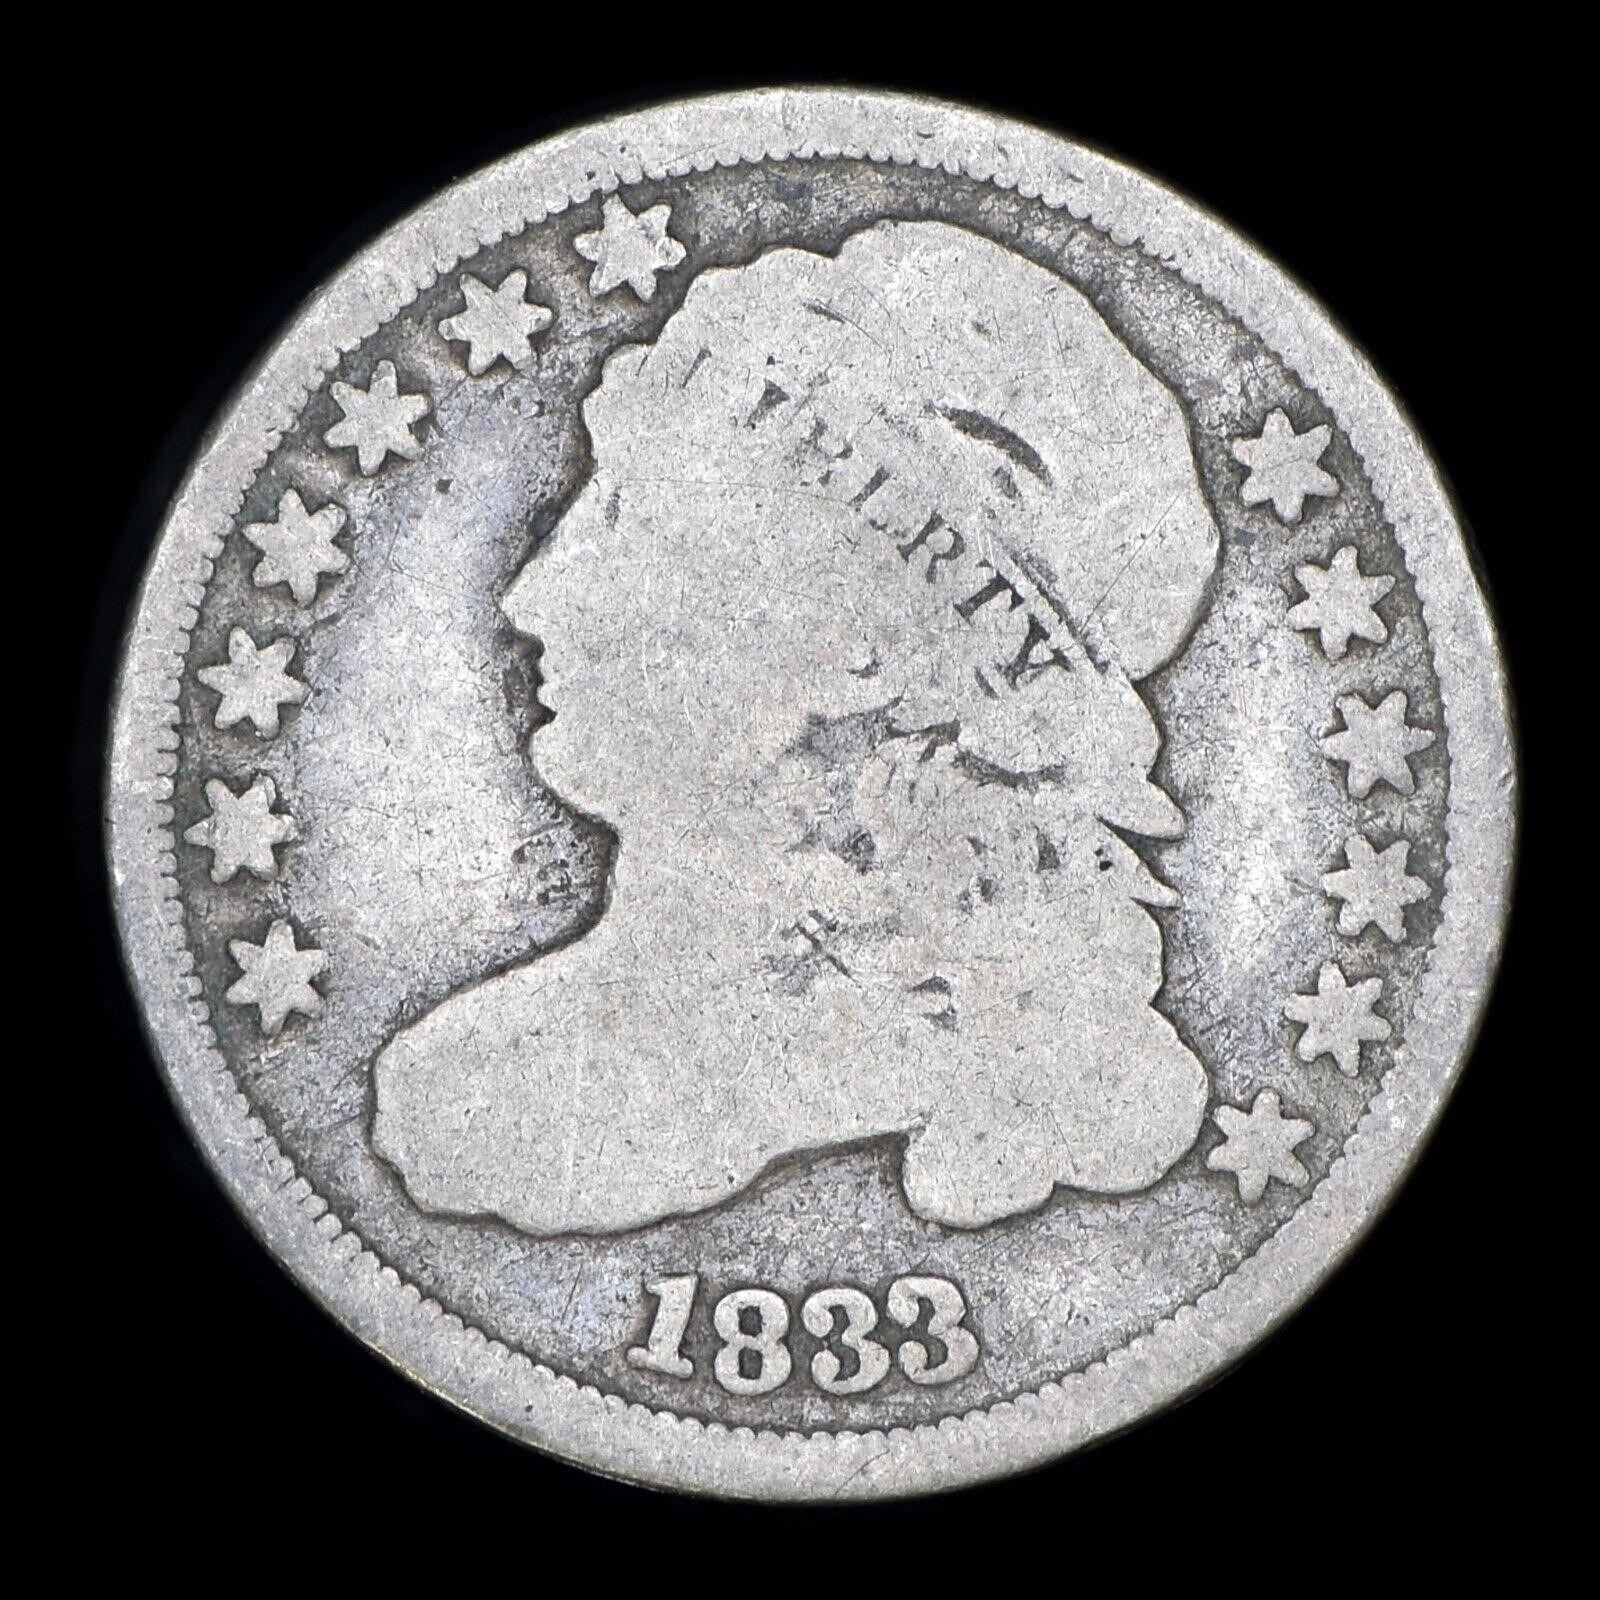 1833 CAPPED BUST DIME SCARCE SILVER COIN